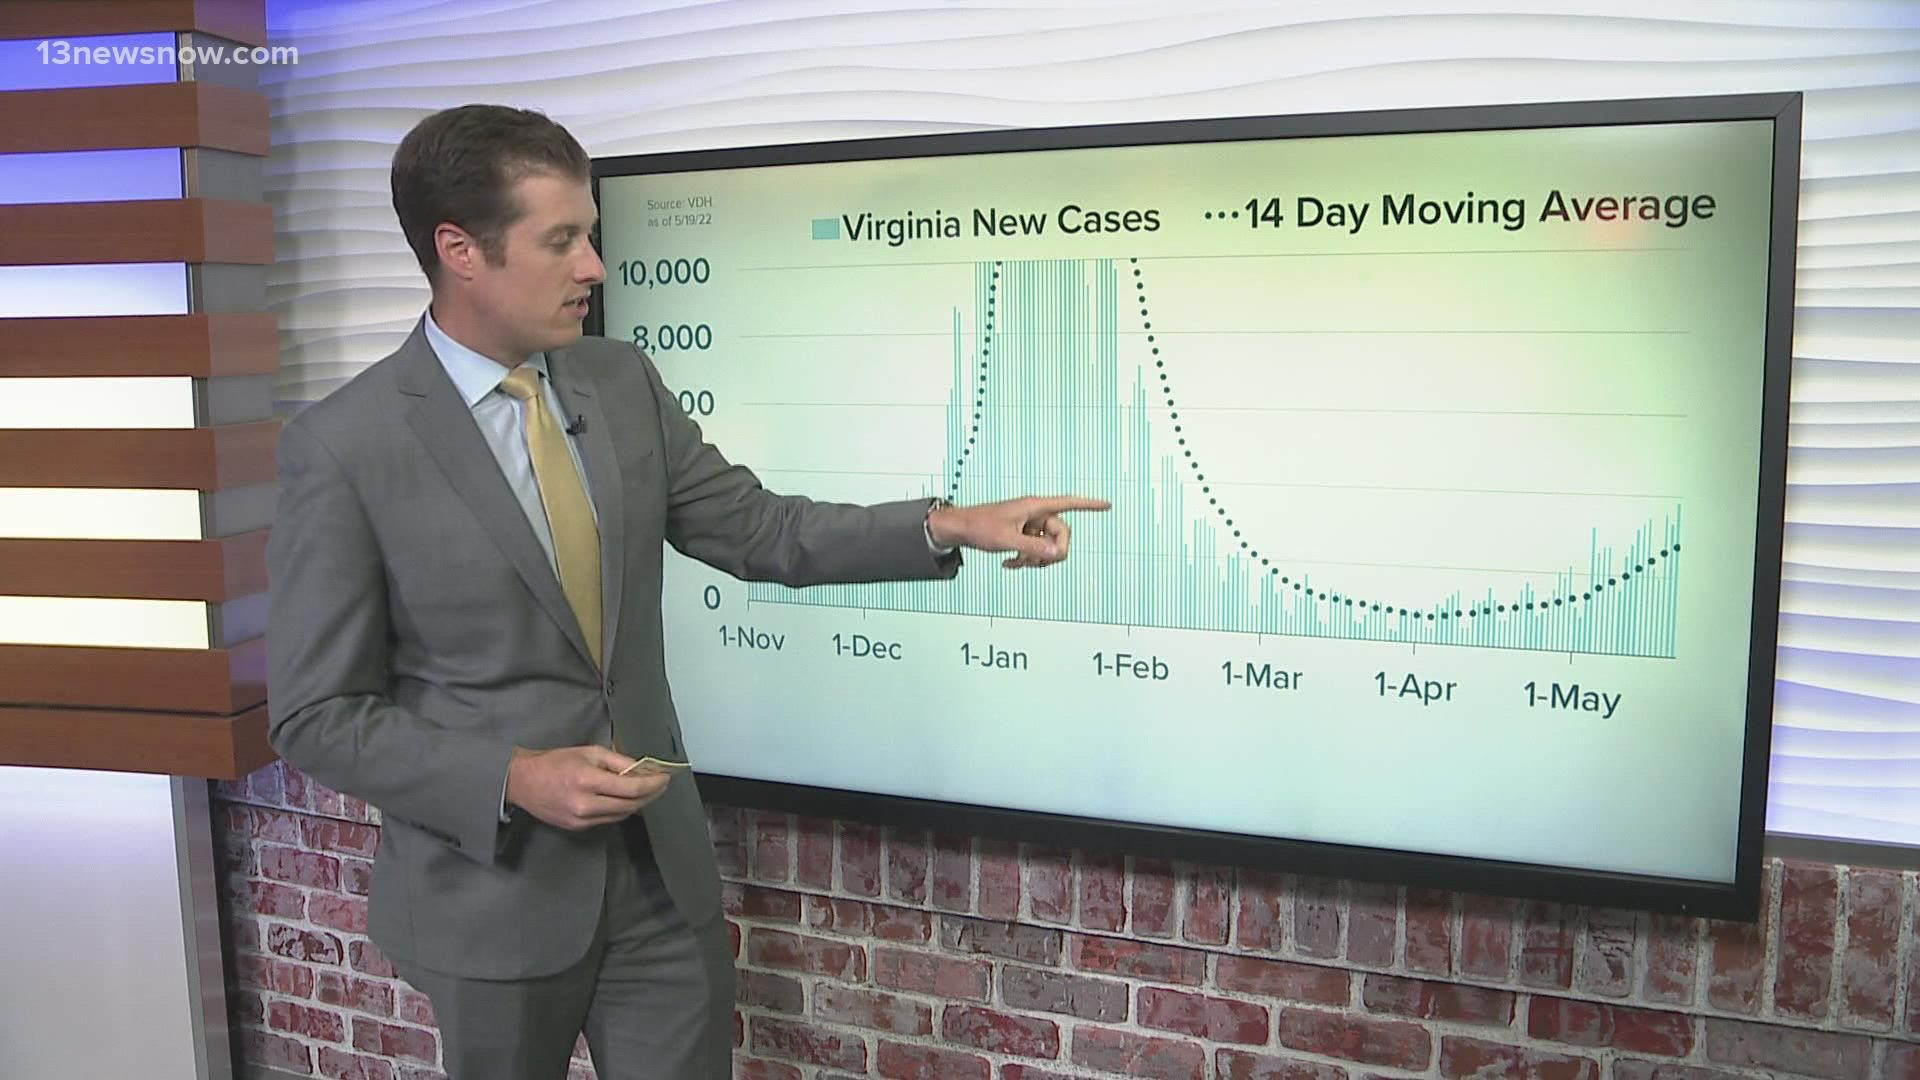 Virginia is averaging nearly 3,000 cases a day.